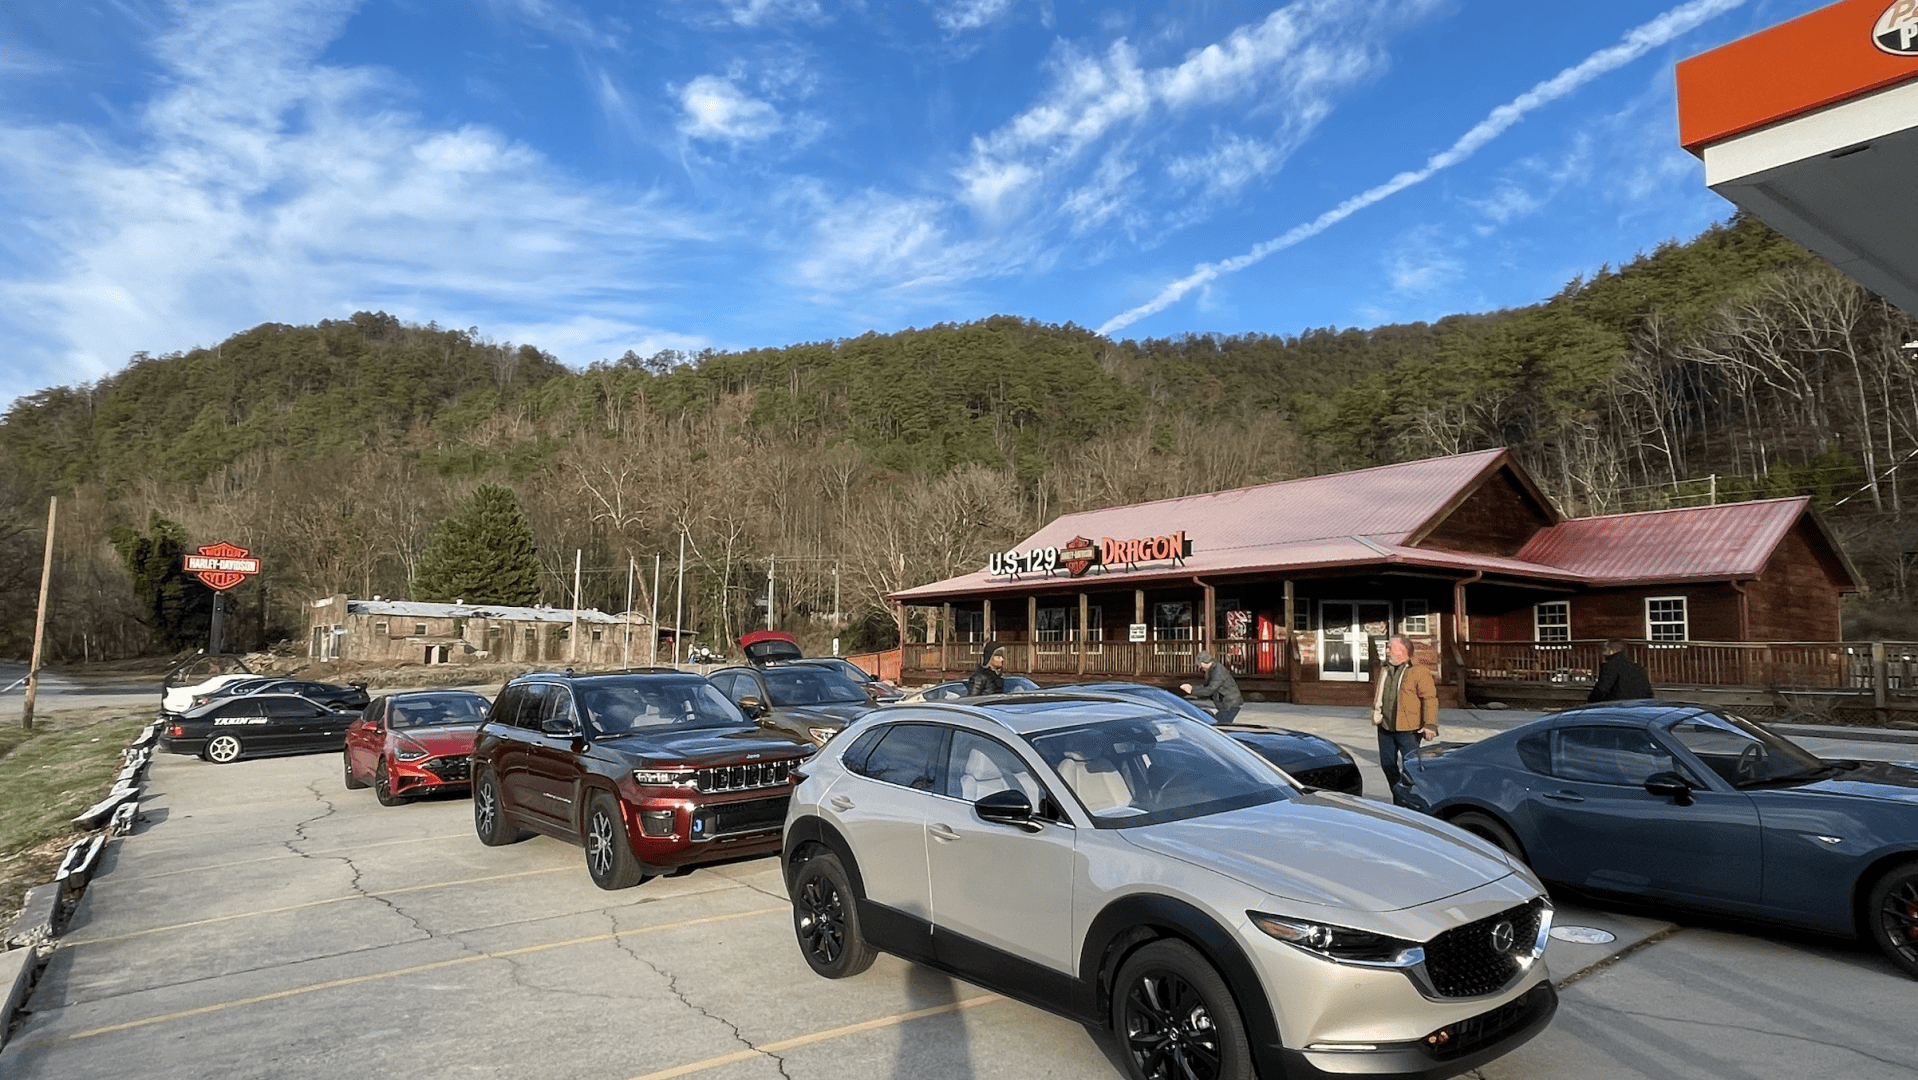 The SERAMA Dragon Drive shows car lovers the best of both worlds in Tennessee